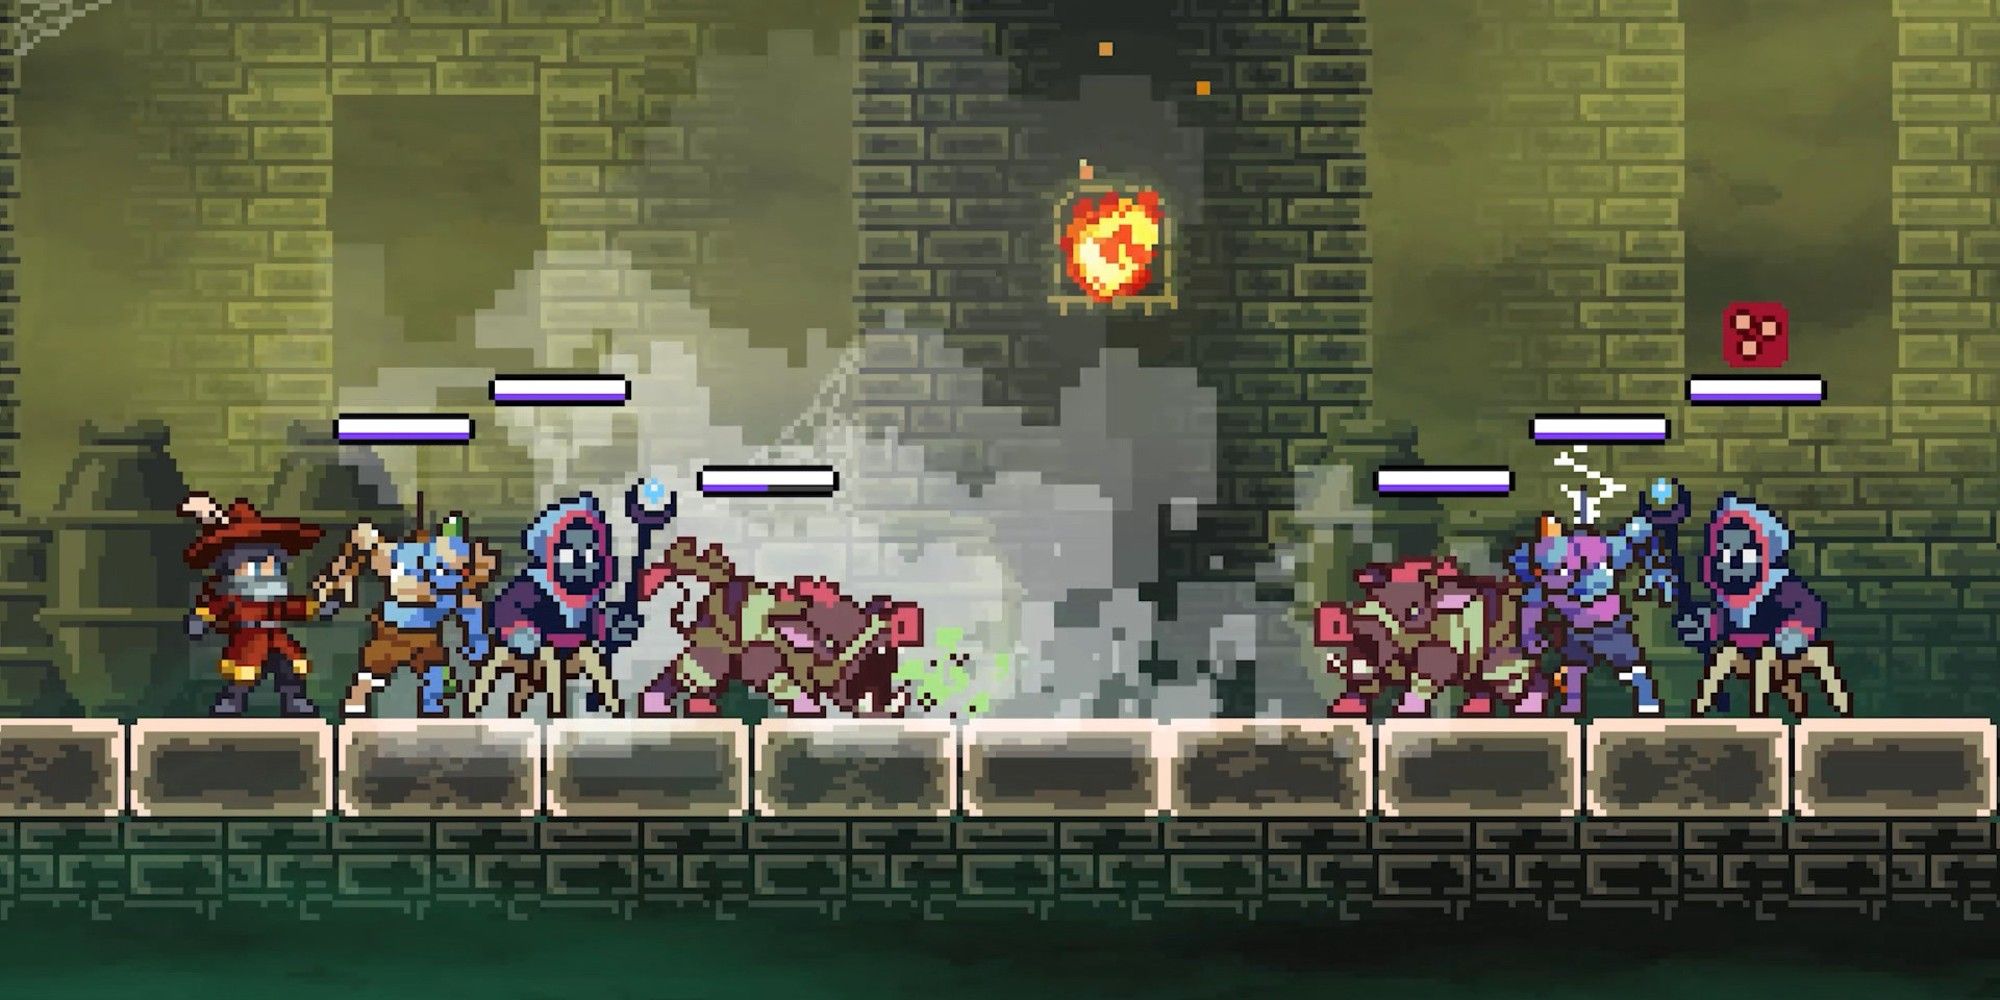 A player engages in team combat with another team of Monsters in Monster Sanctuary